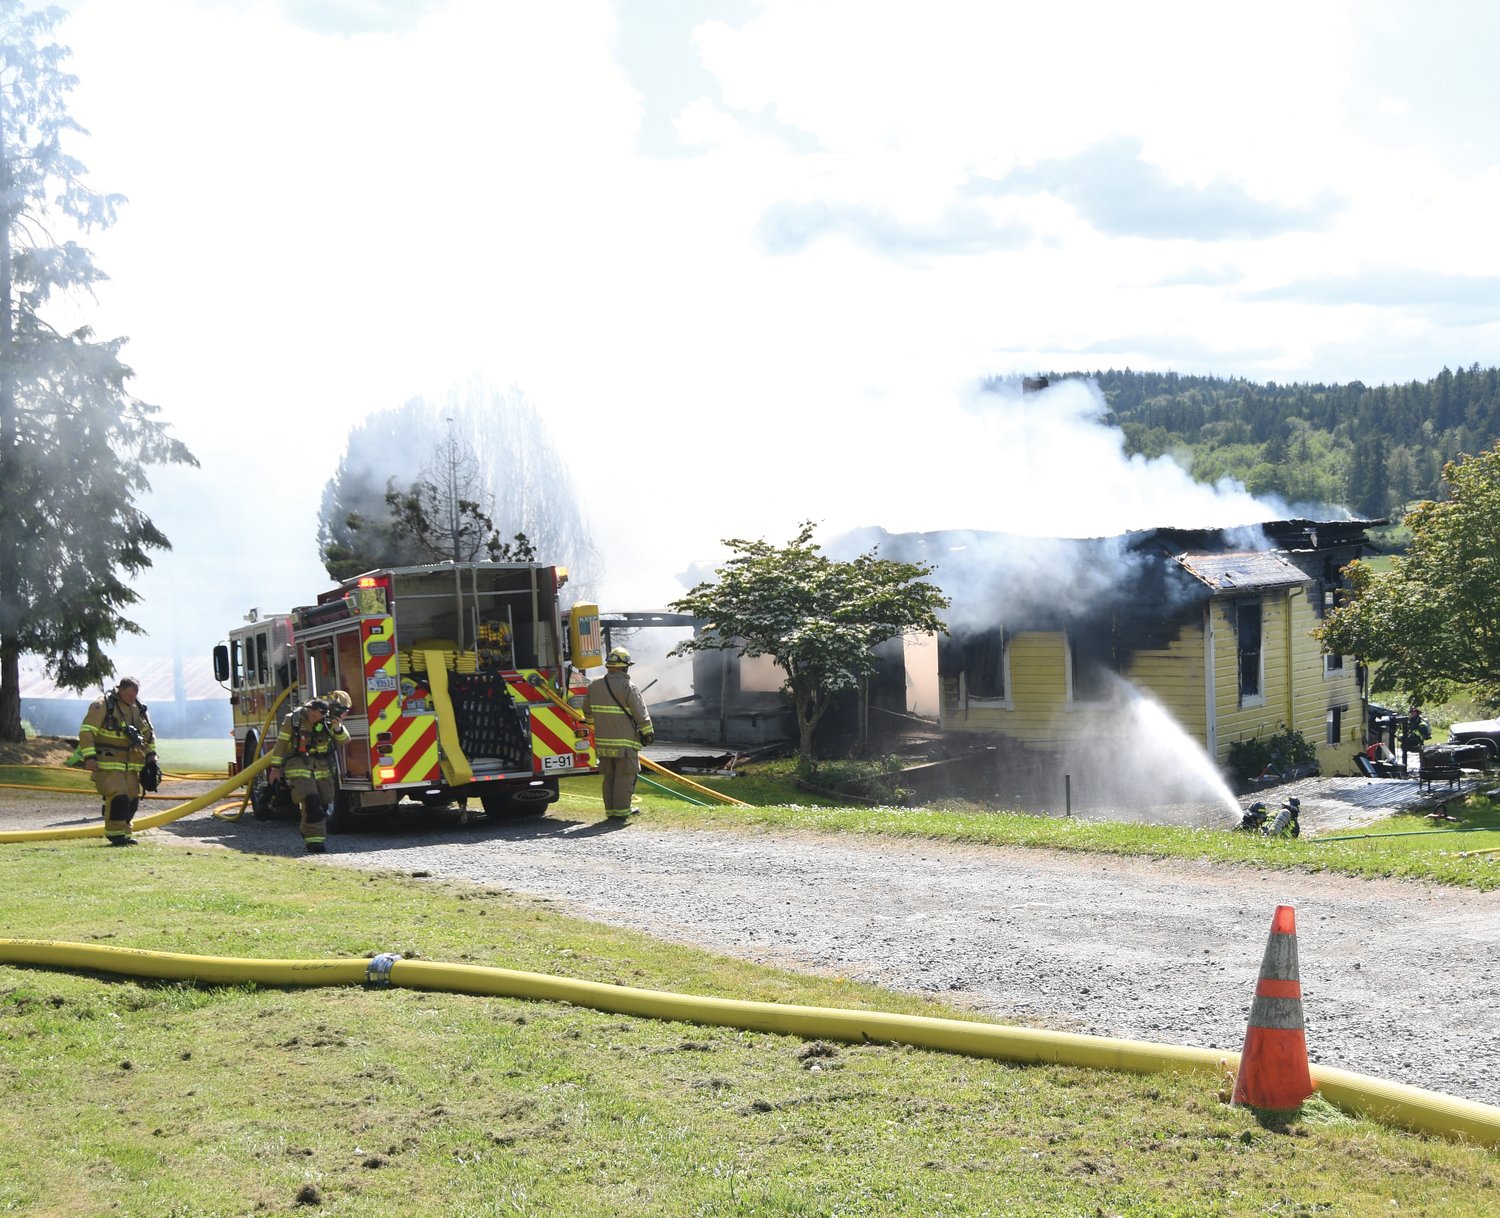 Firefighters use defensive measures to contain the fire at a Chimacum residence Thursday afternoon.